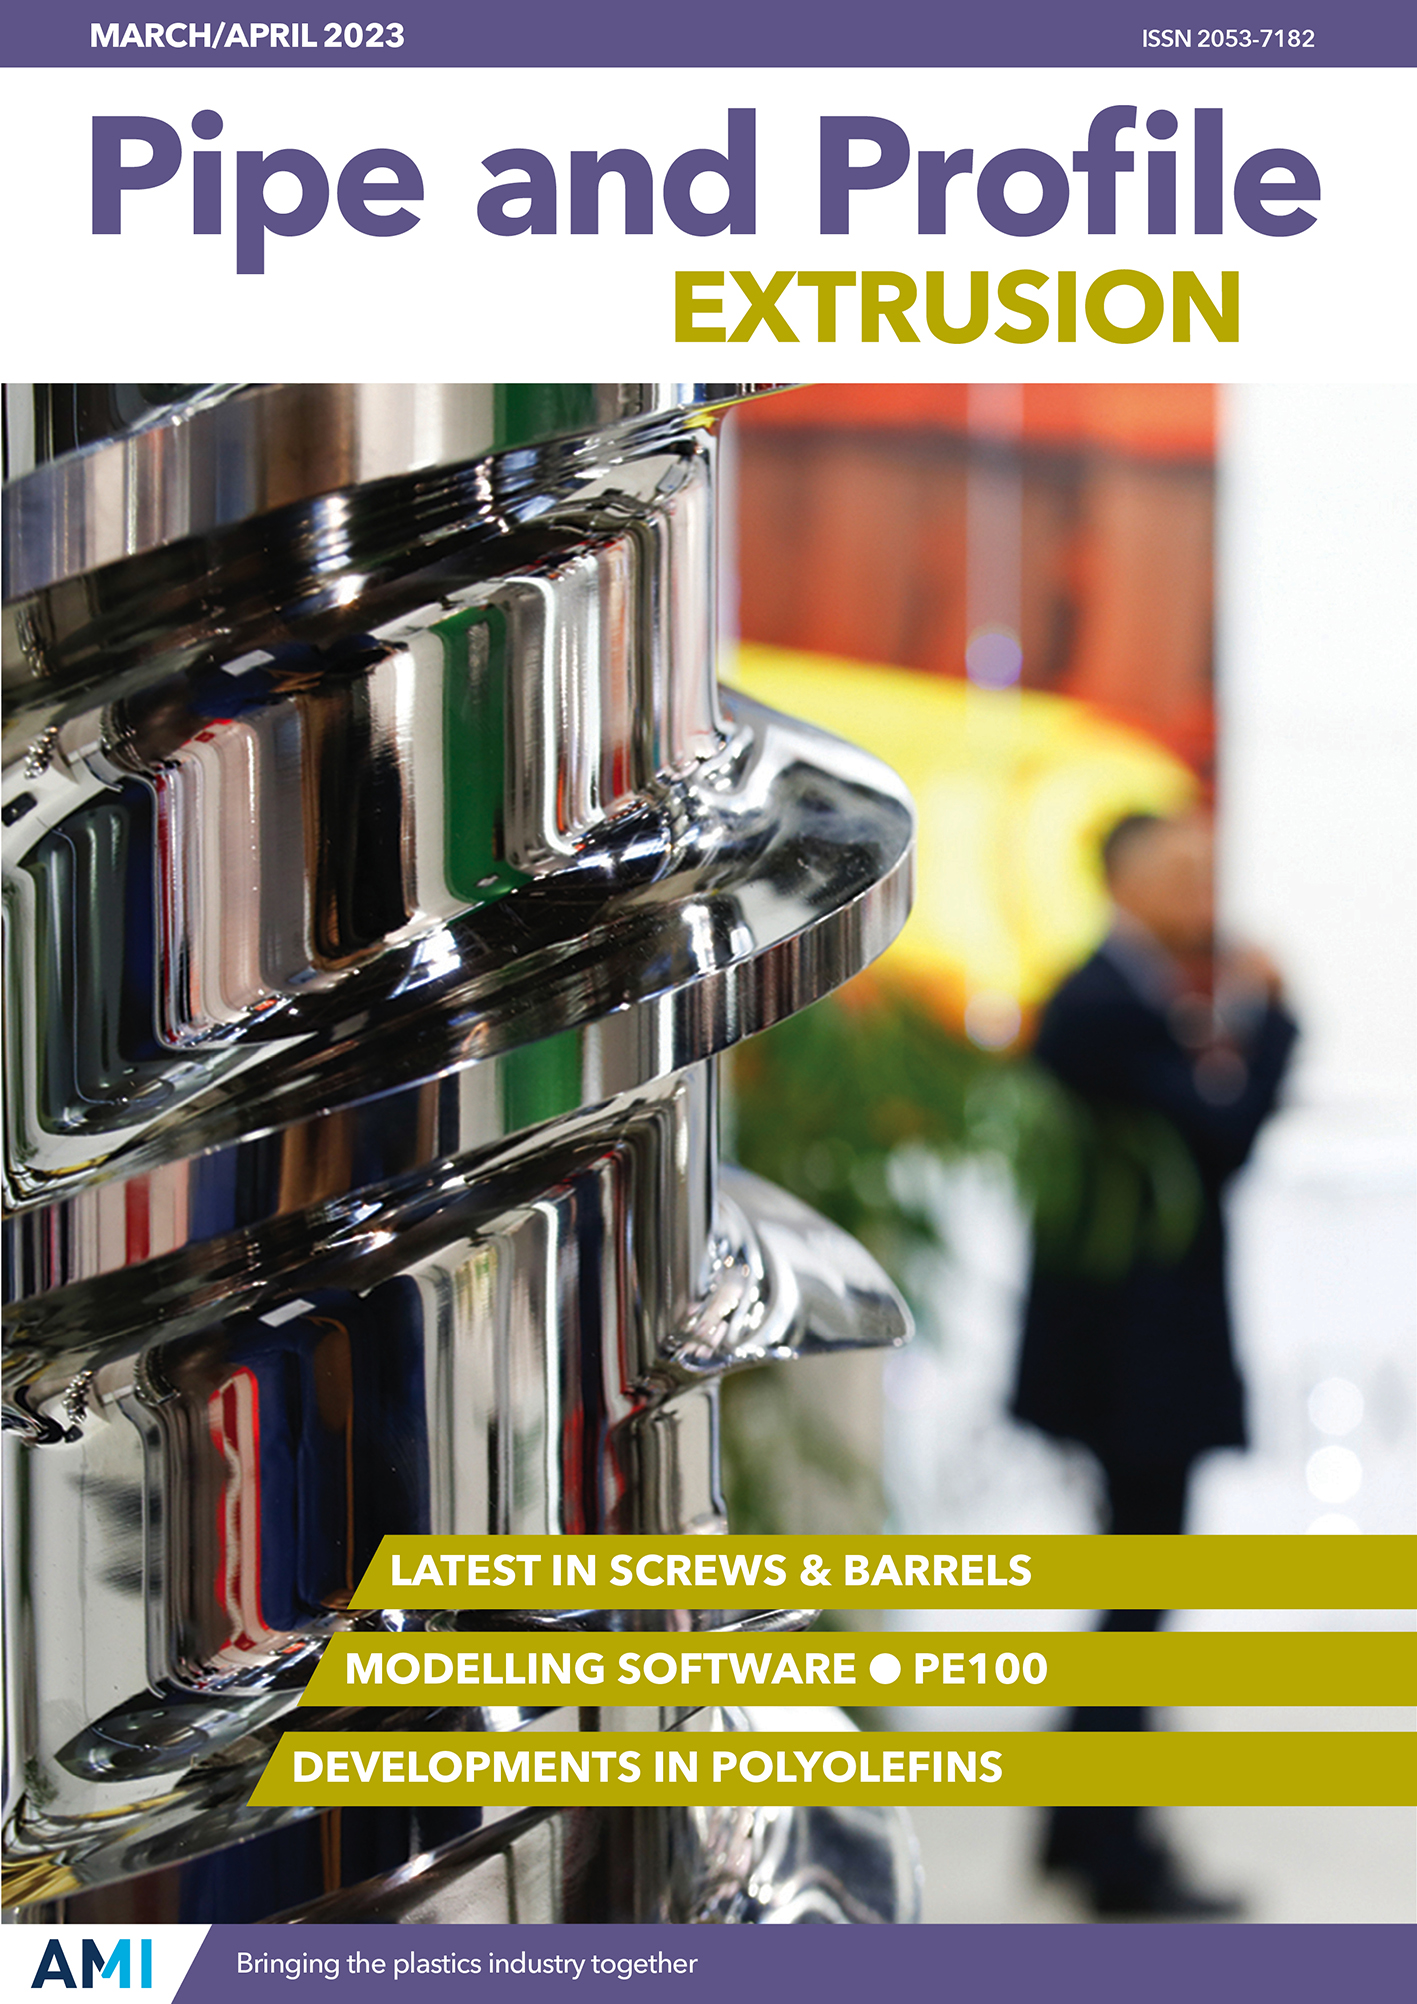 Pipe and Profile Extrusion March/April 2023